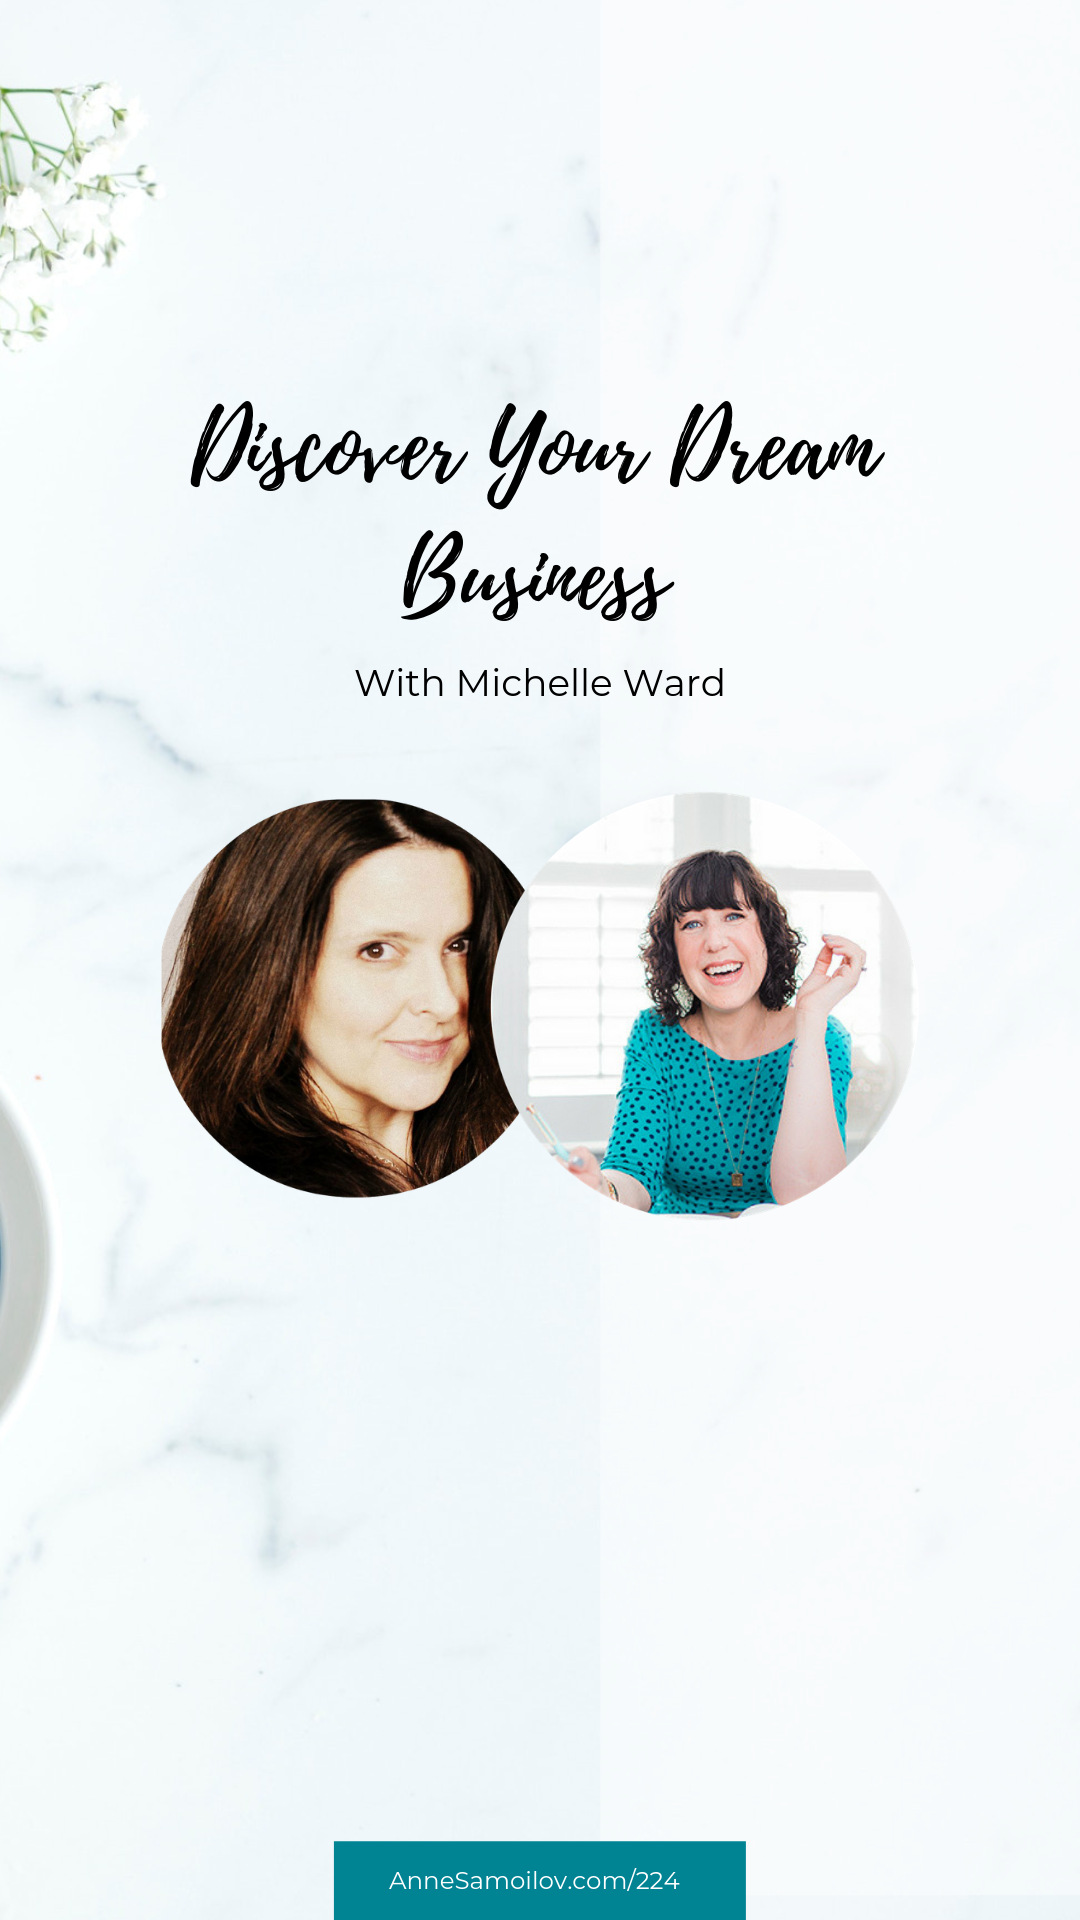 “discover your dream business with michelle ward